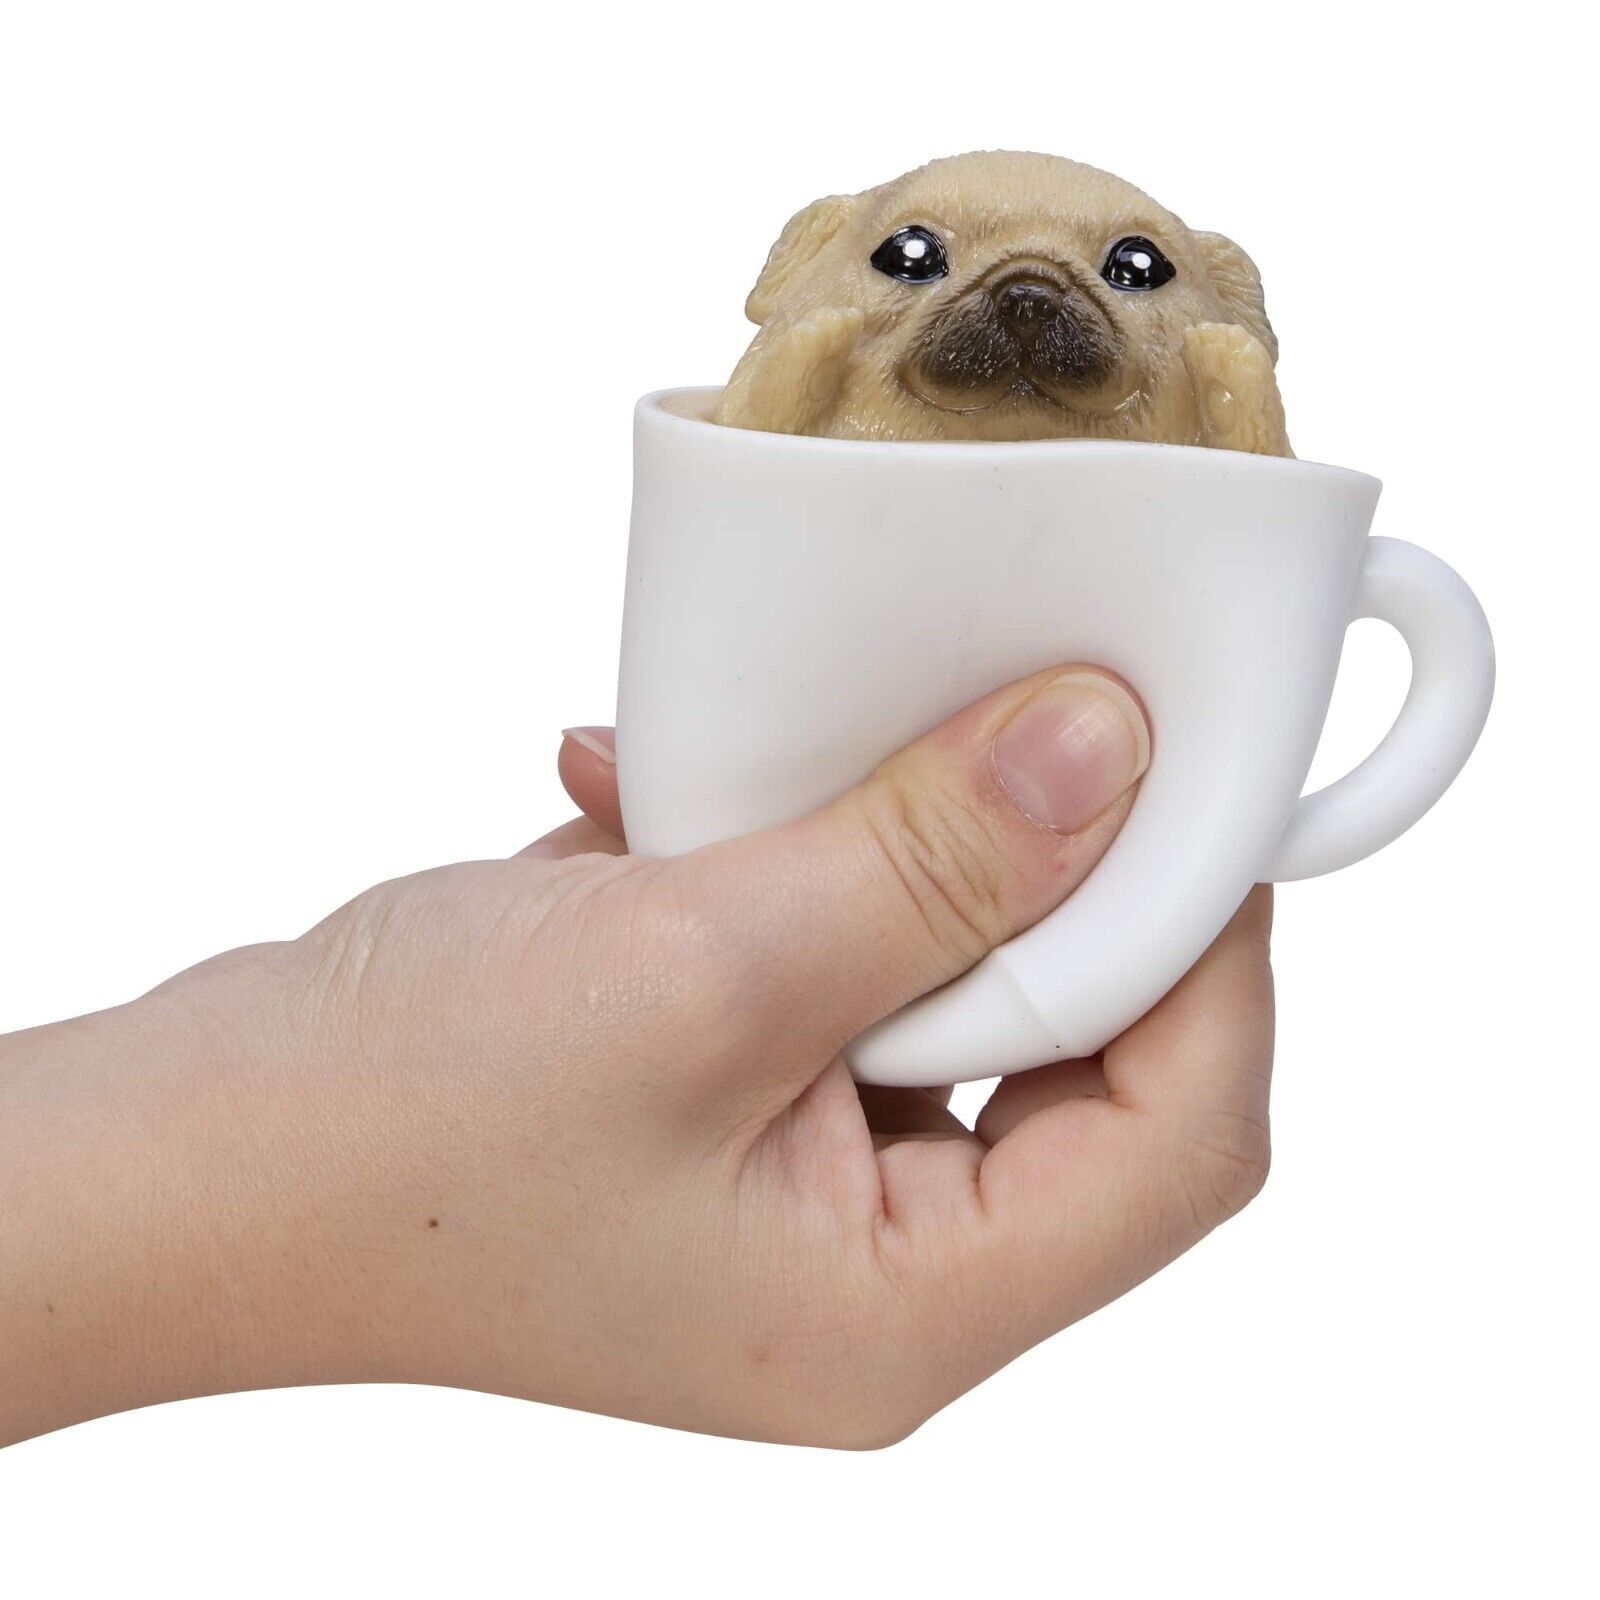 PUP in a Cup Pugachino